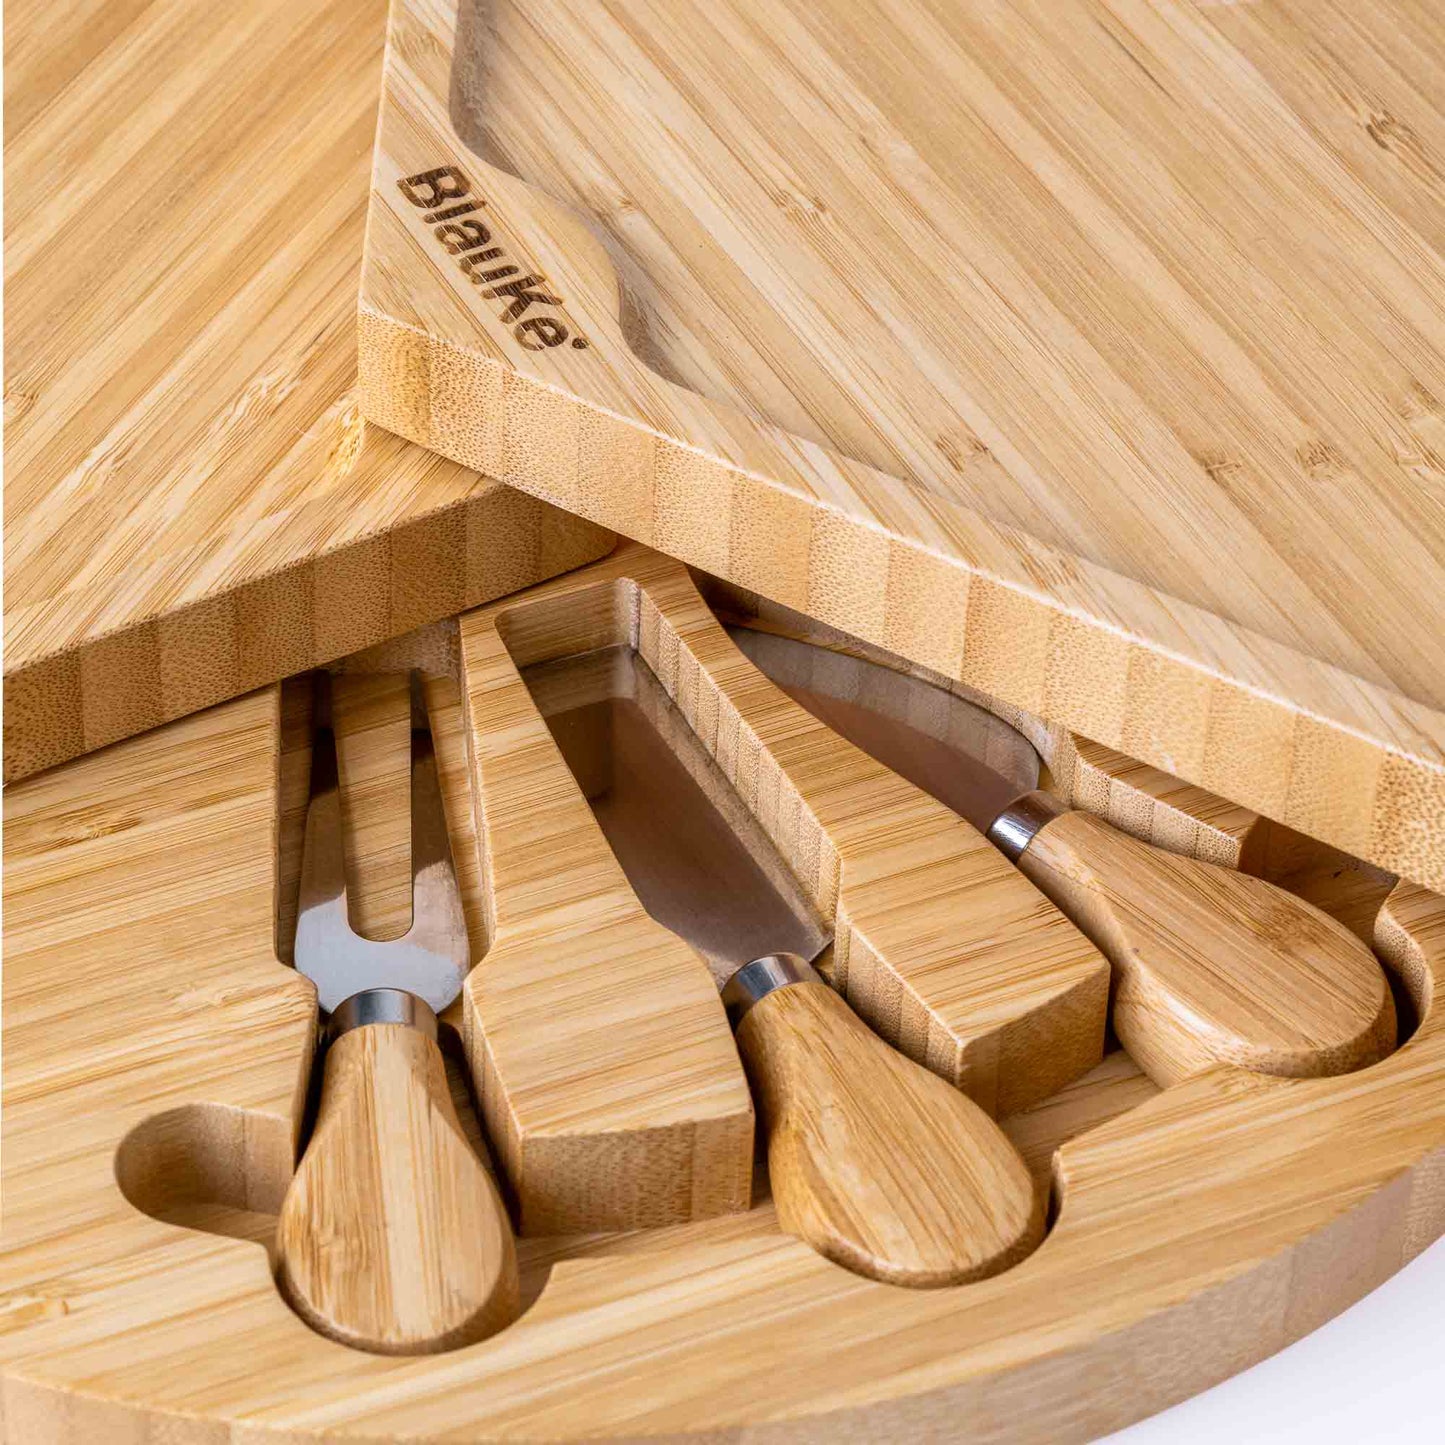 Bamboo Cheese Board and Knife Set - 14 Inch Swiveling Charcuterie Board with Slide-Out Drawer - Cheese Serving Platter, Round Serving Tray-10